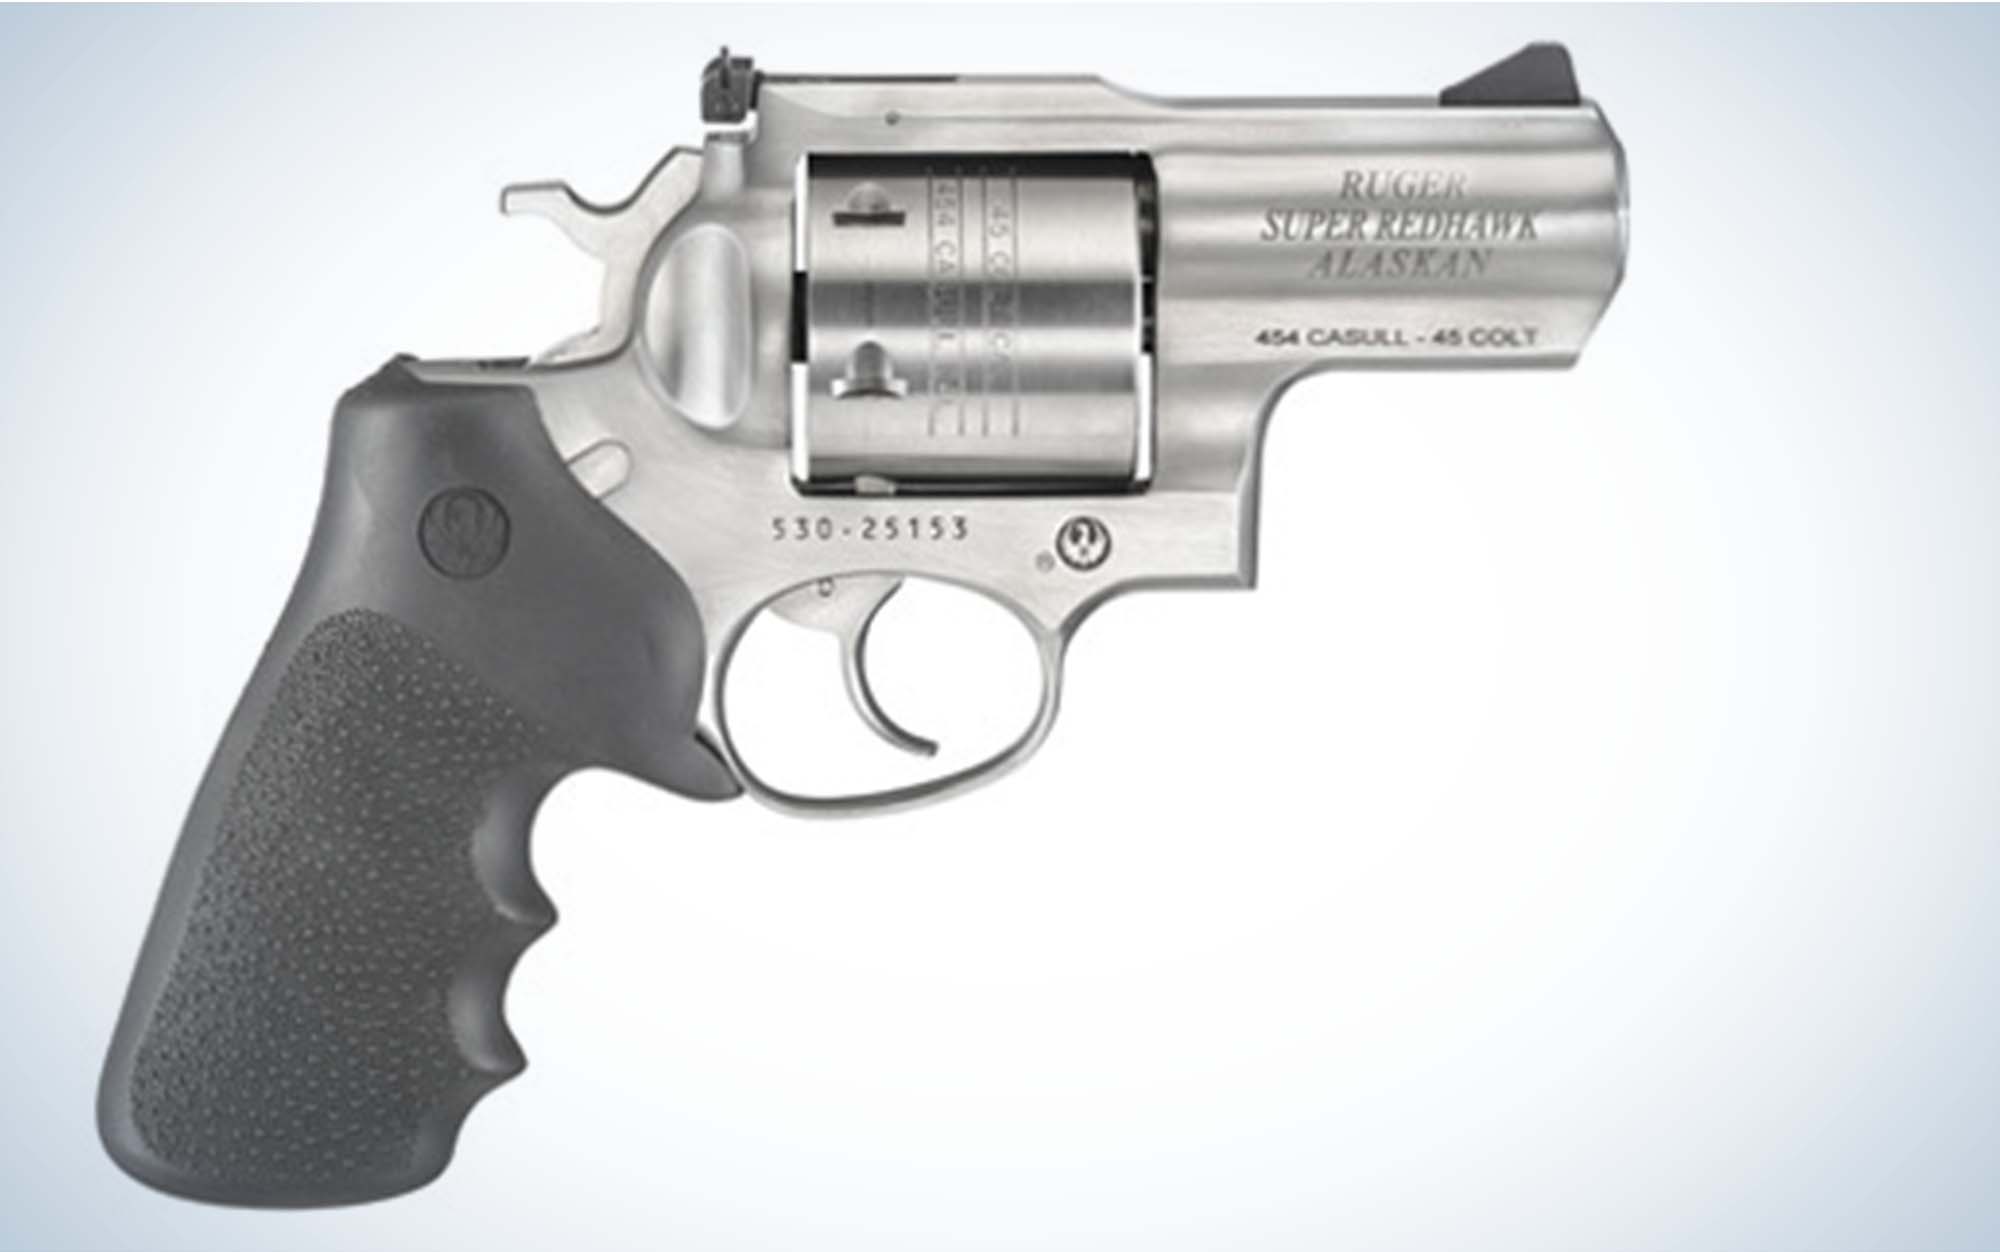 The Ruger Super Redhawk Alaskan is a double action revolver.